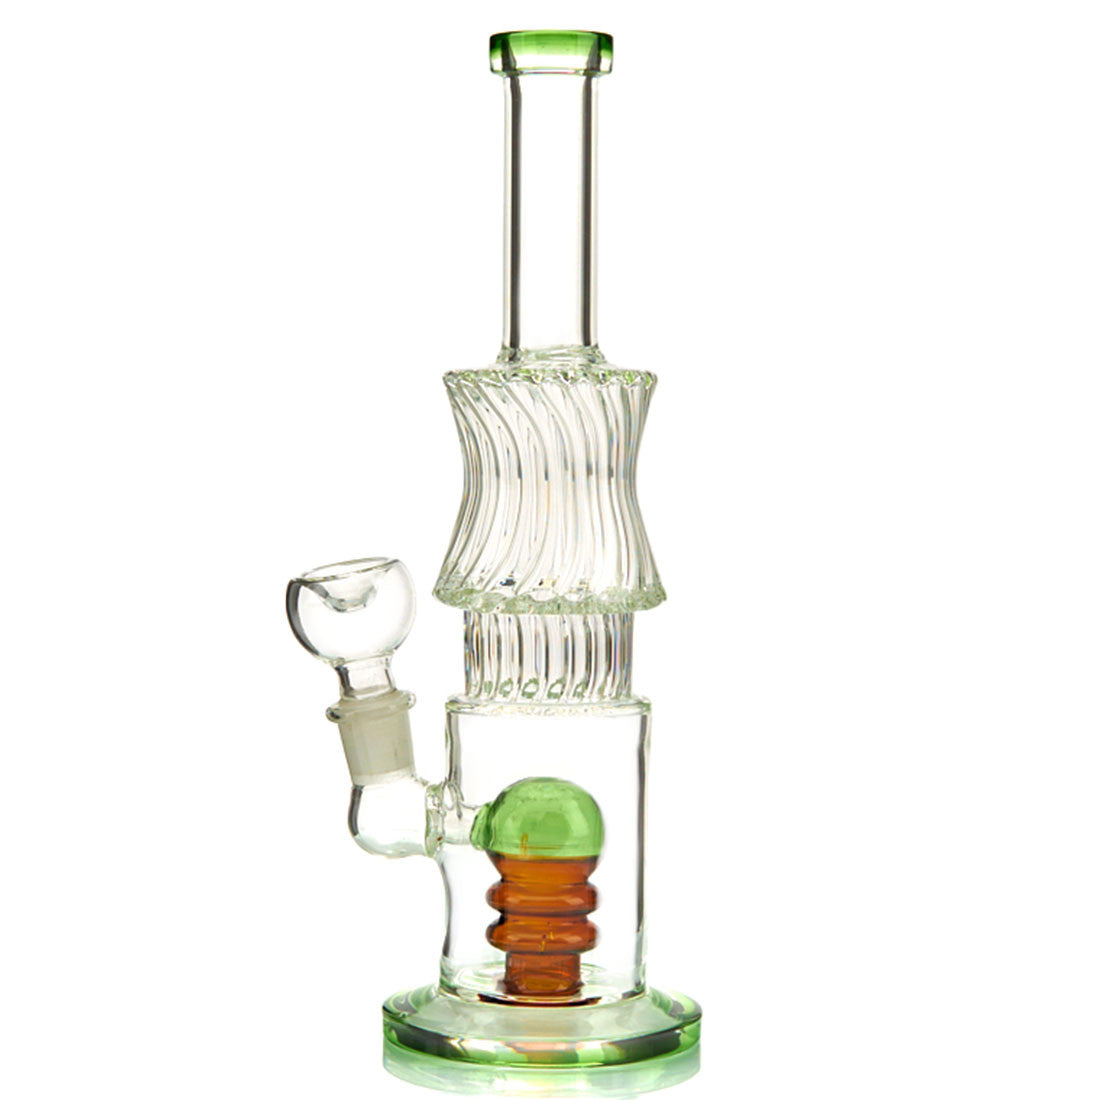 Carnival Water Pipe with Fun Colored Glass and Percolator. Comes with flower bowl 1